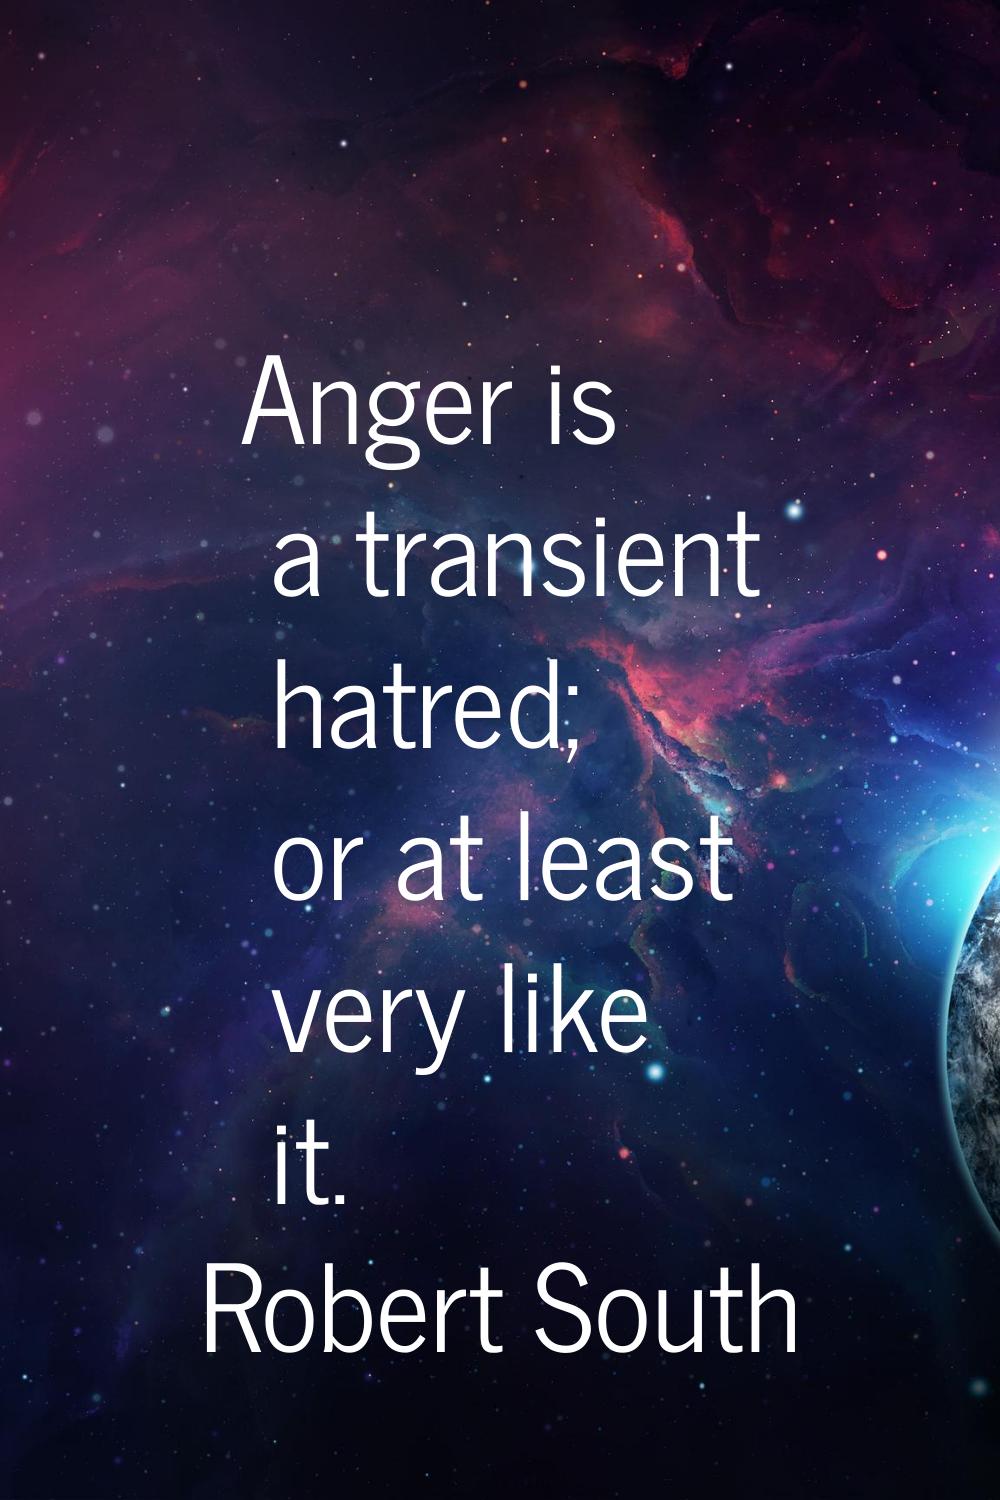 Anger is a transient hatred; or at least very like it.